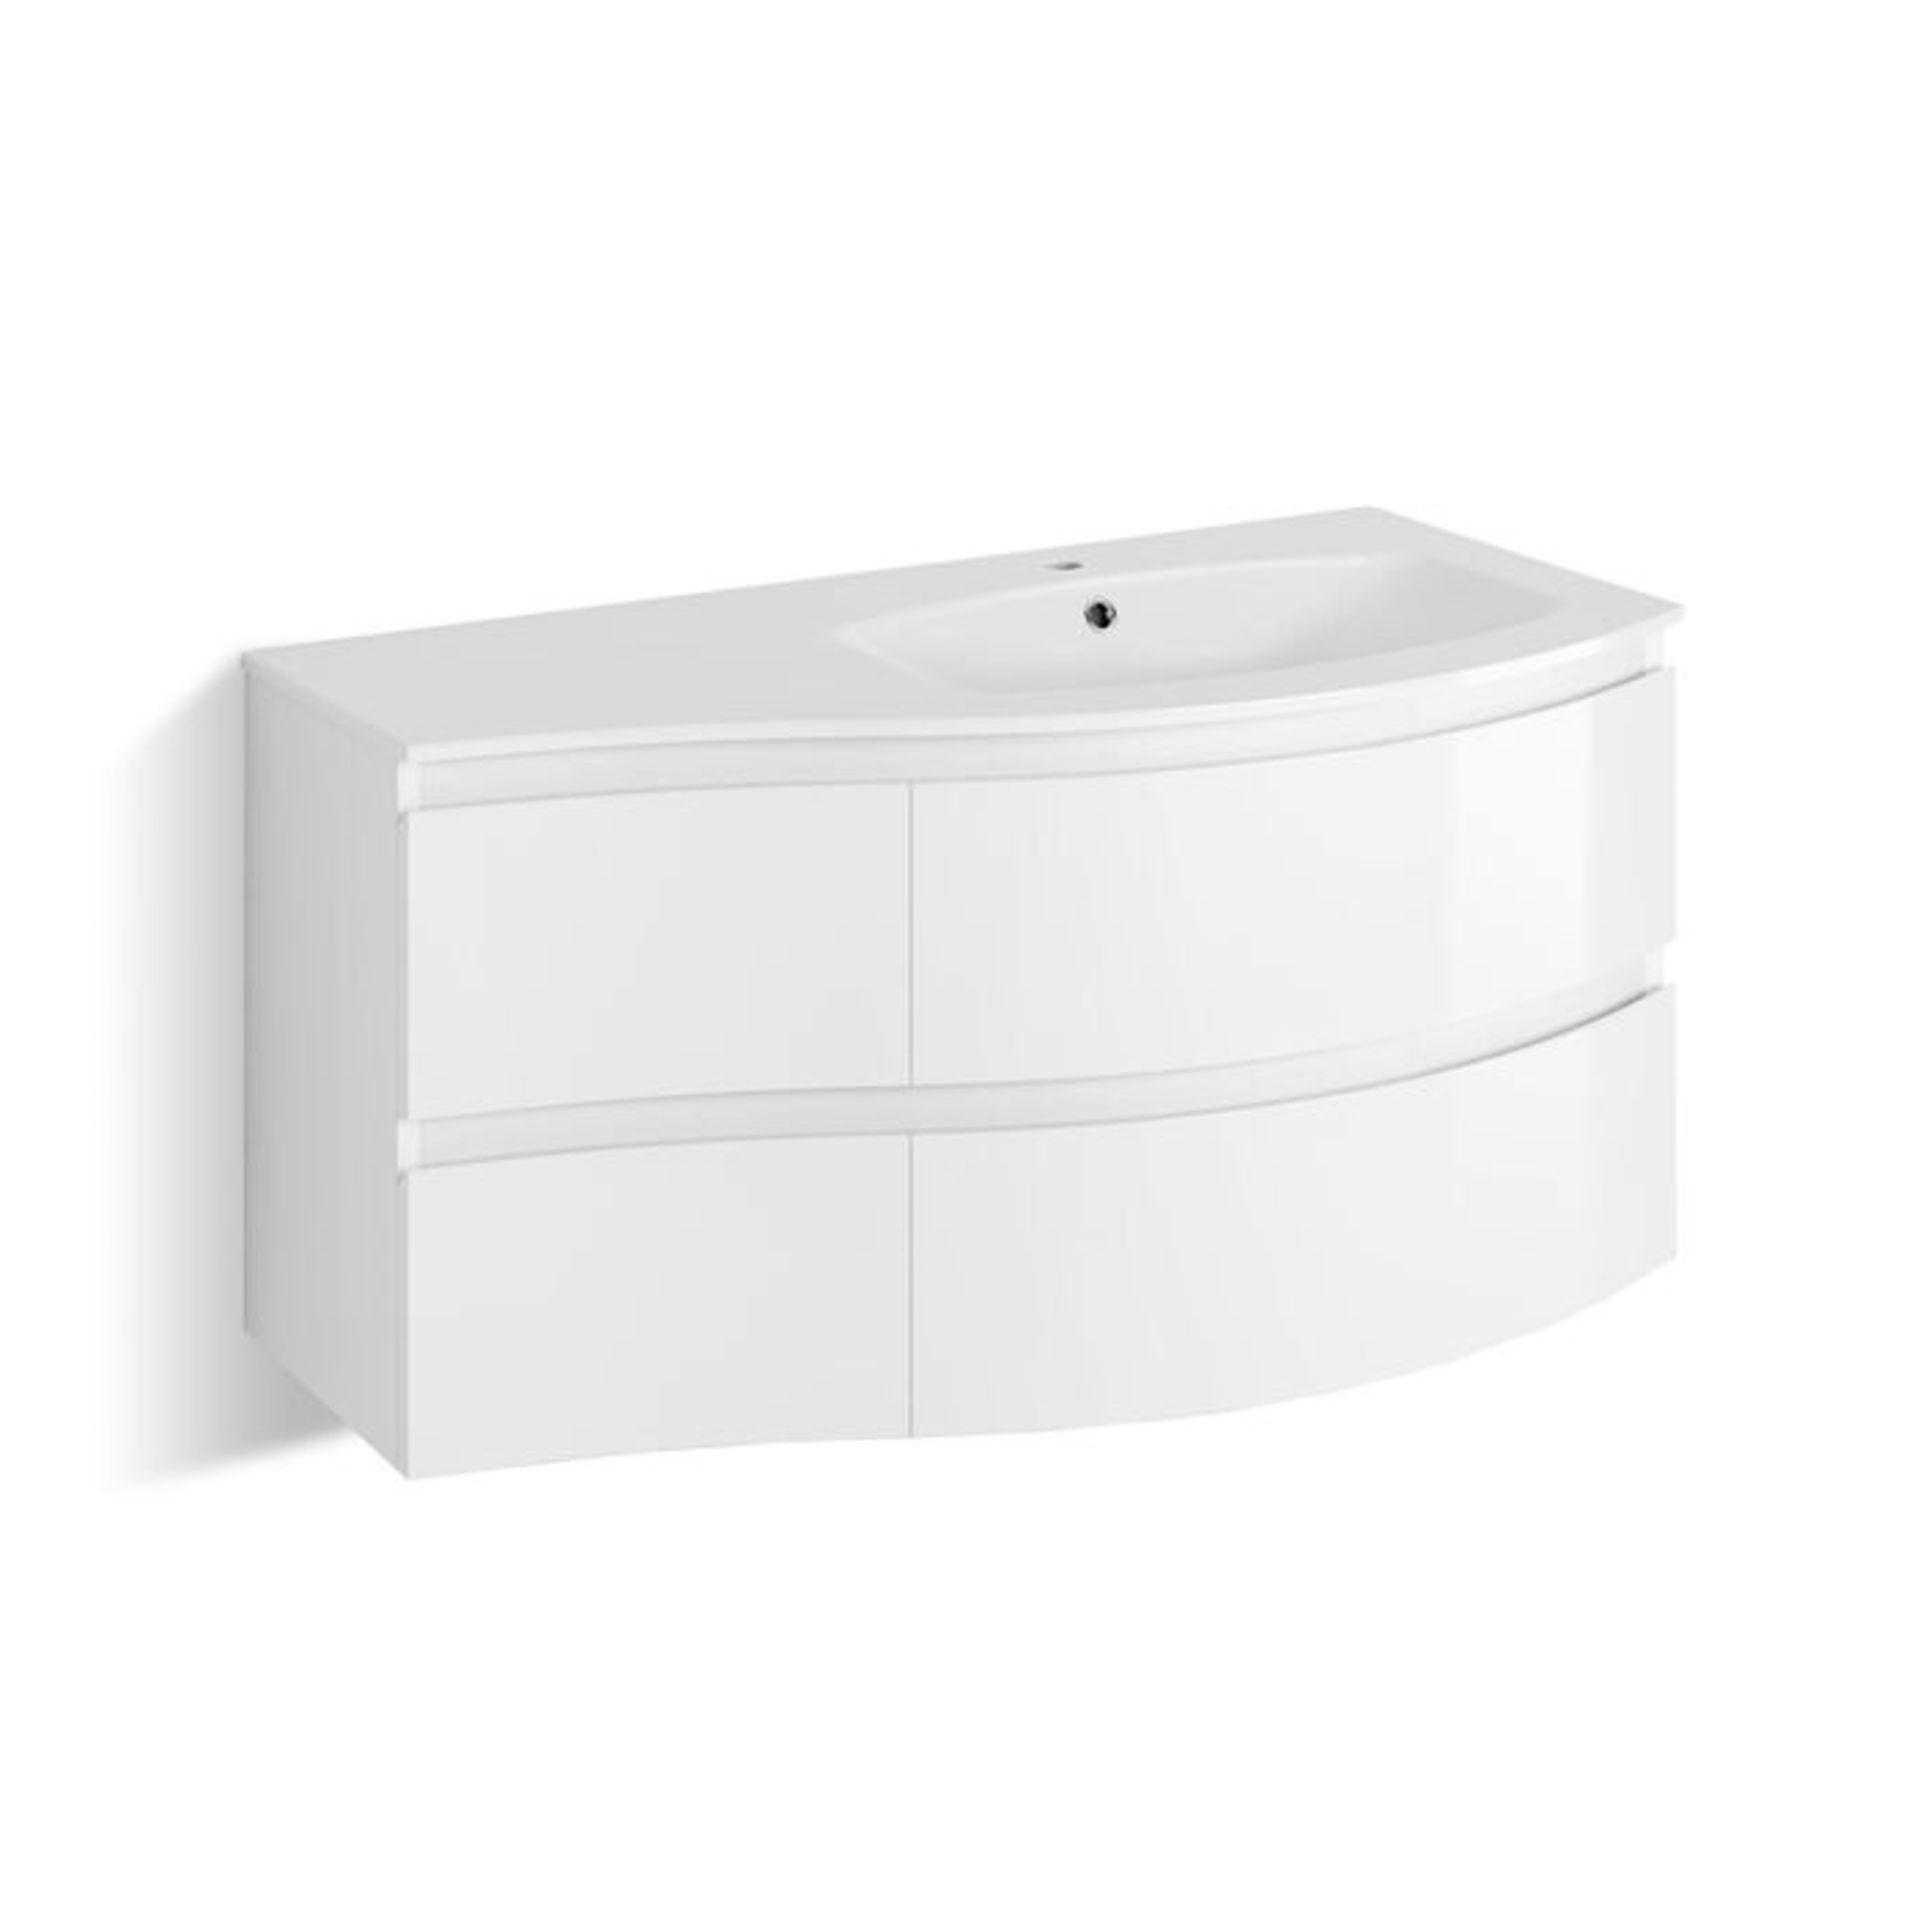 (CC26) 1040mm Amelie High Gloss White Curved Vanity Unit - Right Hand - Wall Hung. Clever wall... - Image 3 of 4